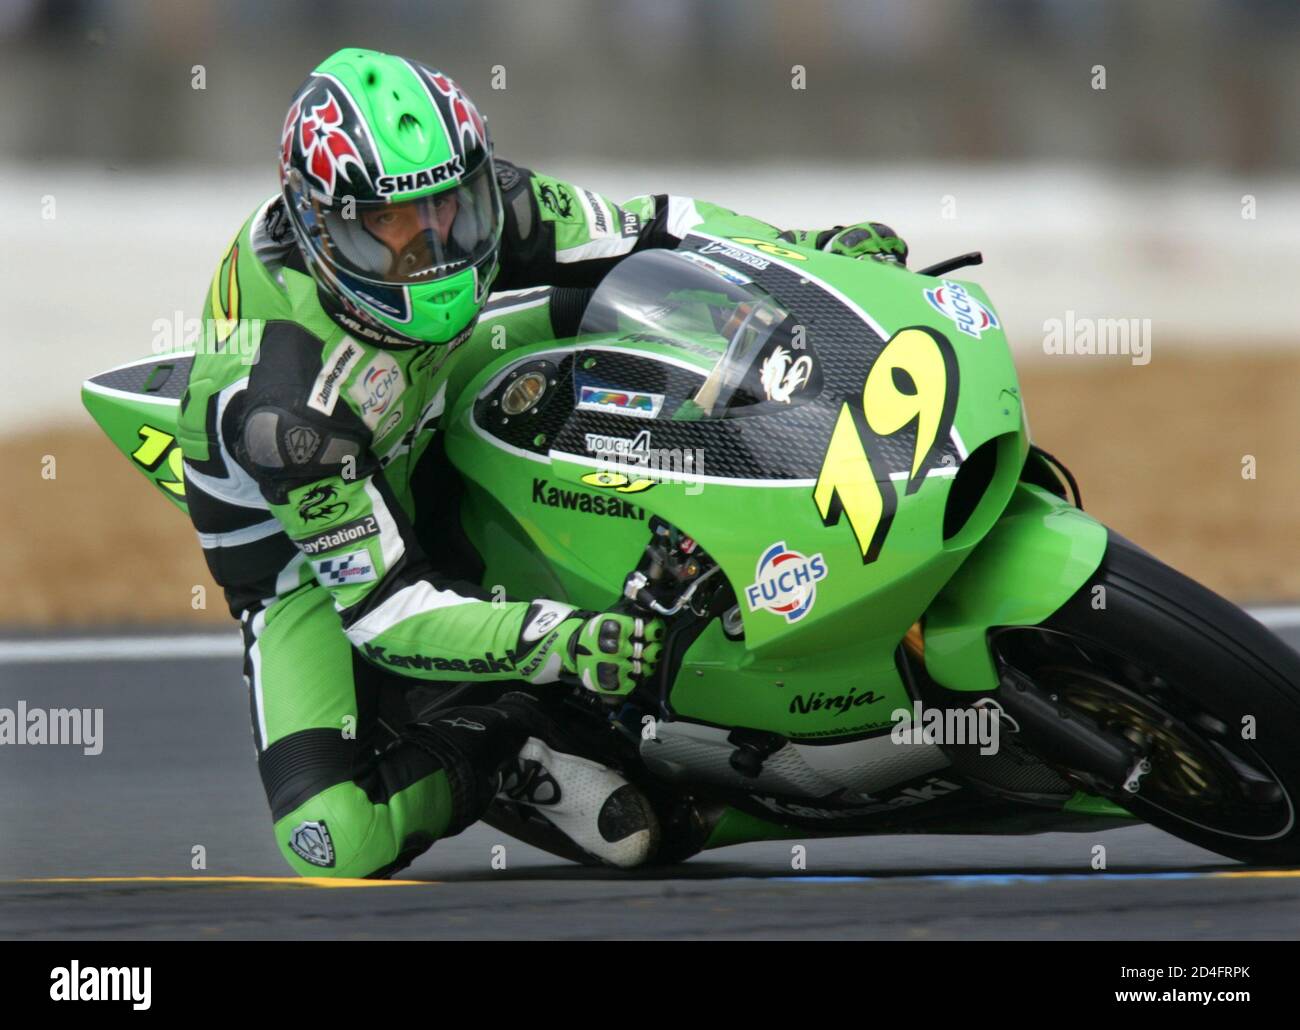 rider Olivier Jacque of France rides his Kawasaki during a free practice MotoGP motorcycling French Grand Prix at the Le Mans circuit in the west of France May 14,